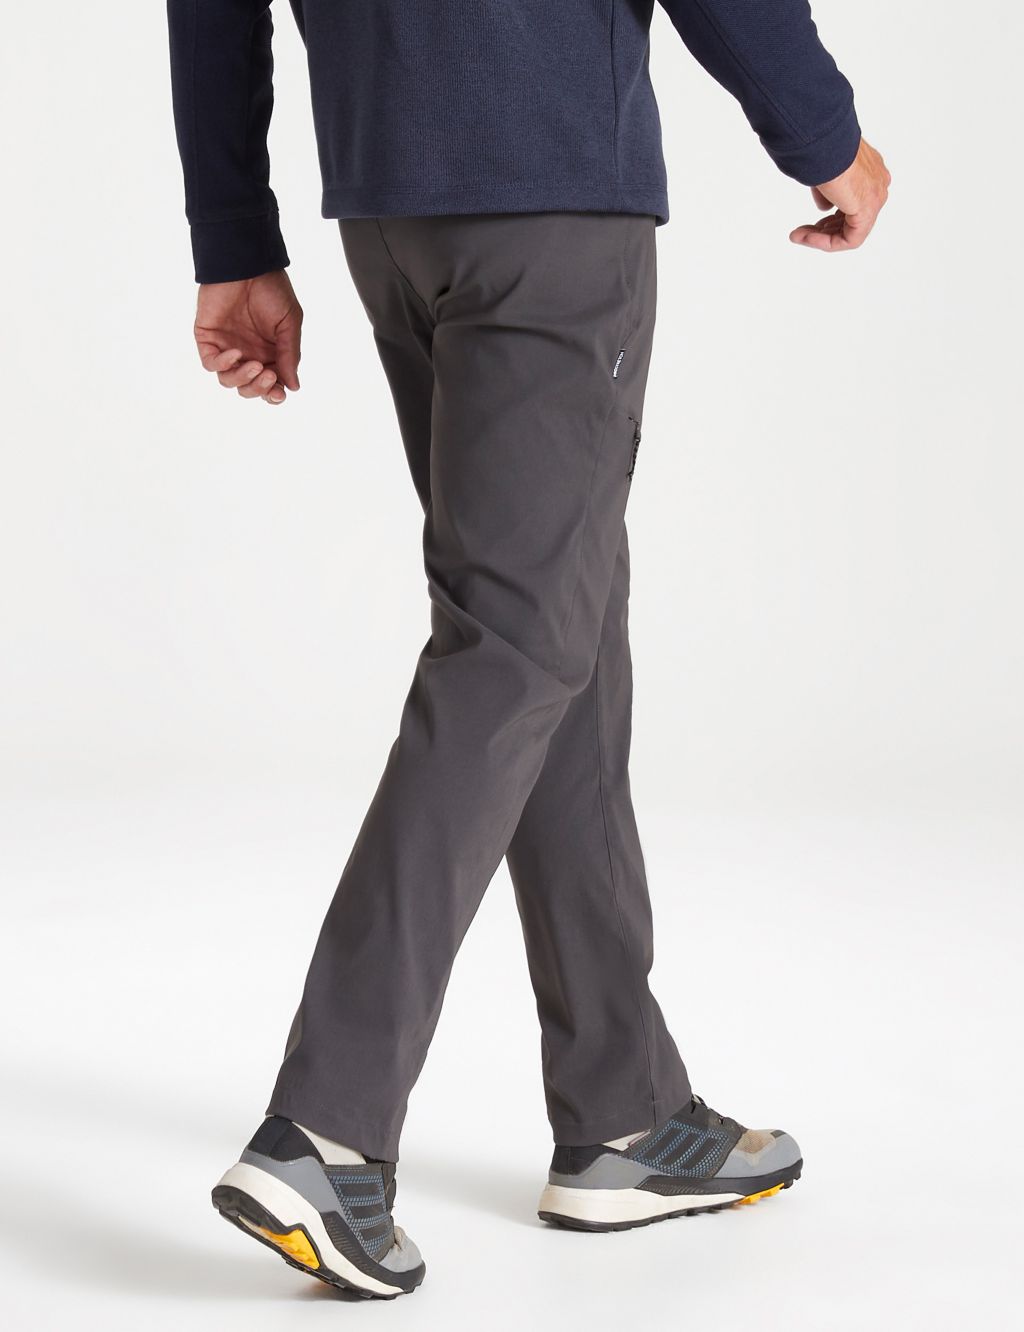 Kiwi Tailored Fit Stretch Trekking Trousers image 4